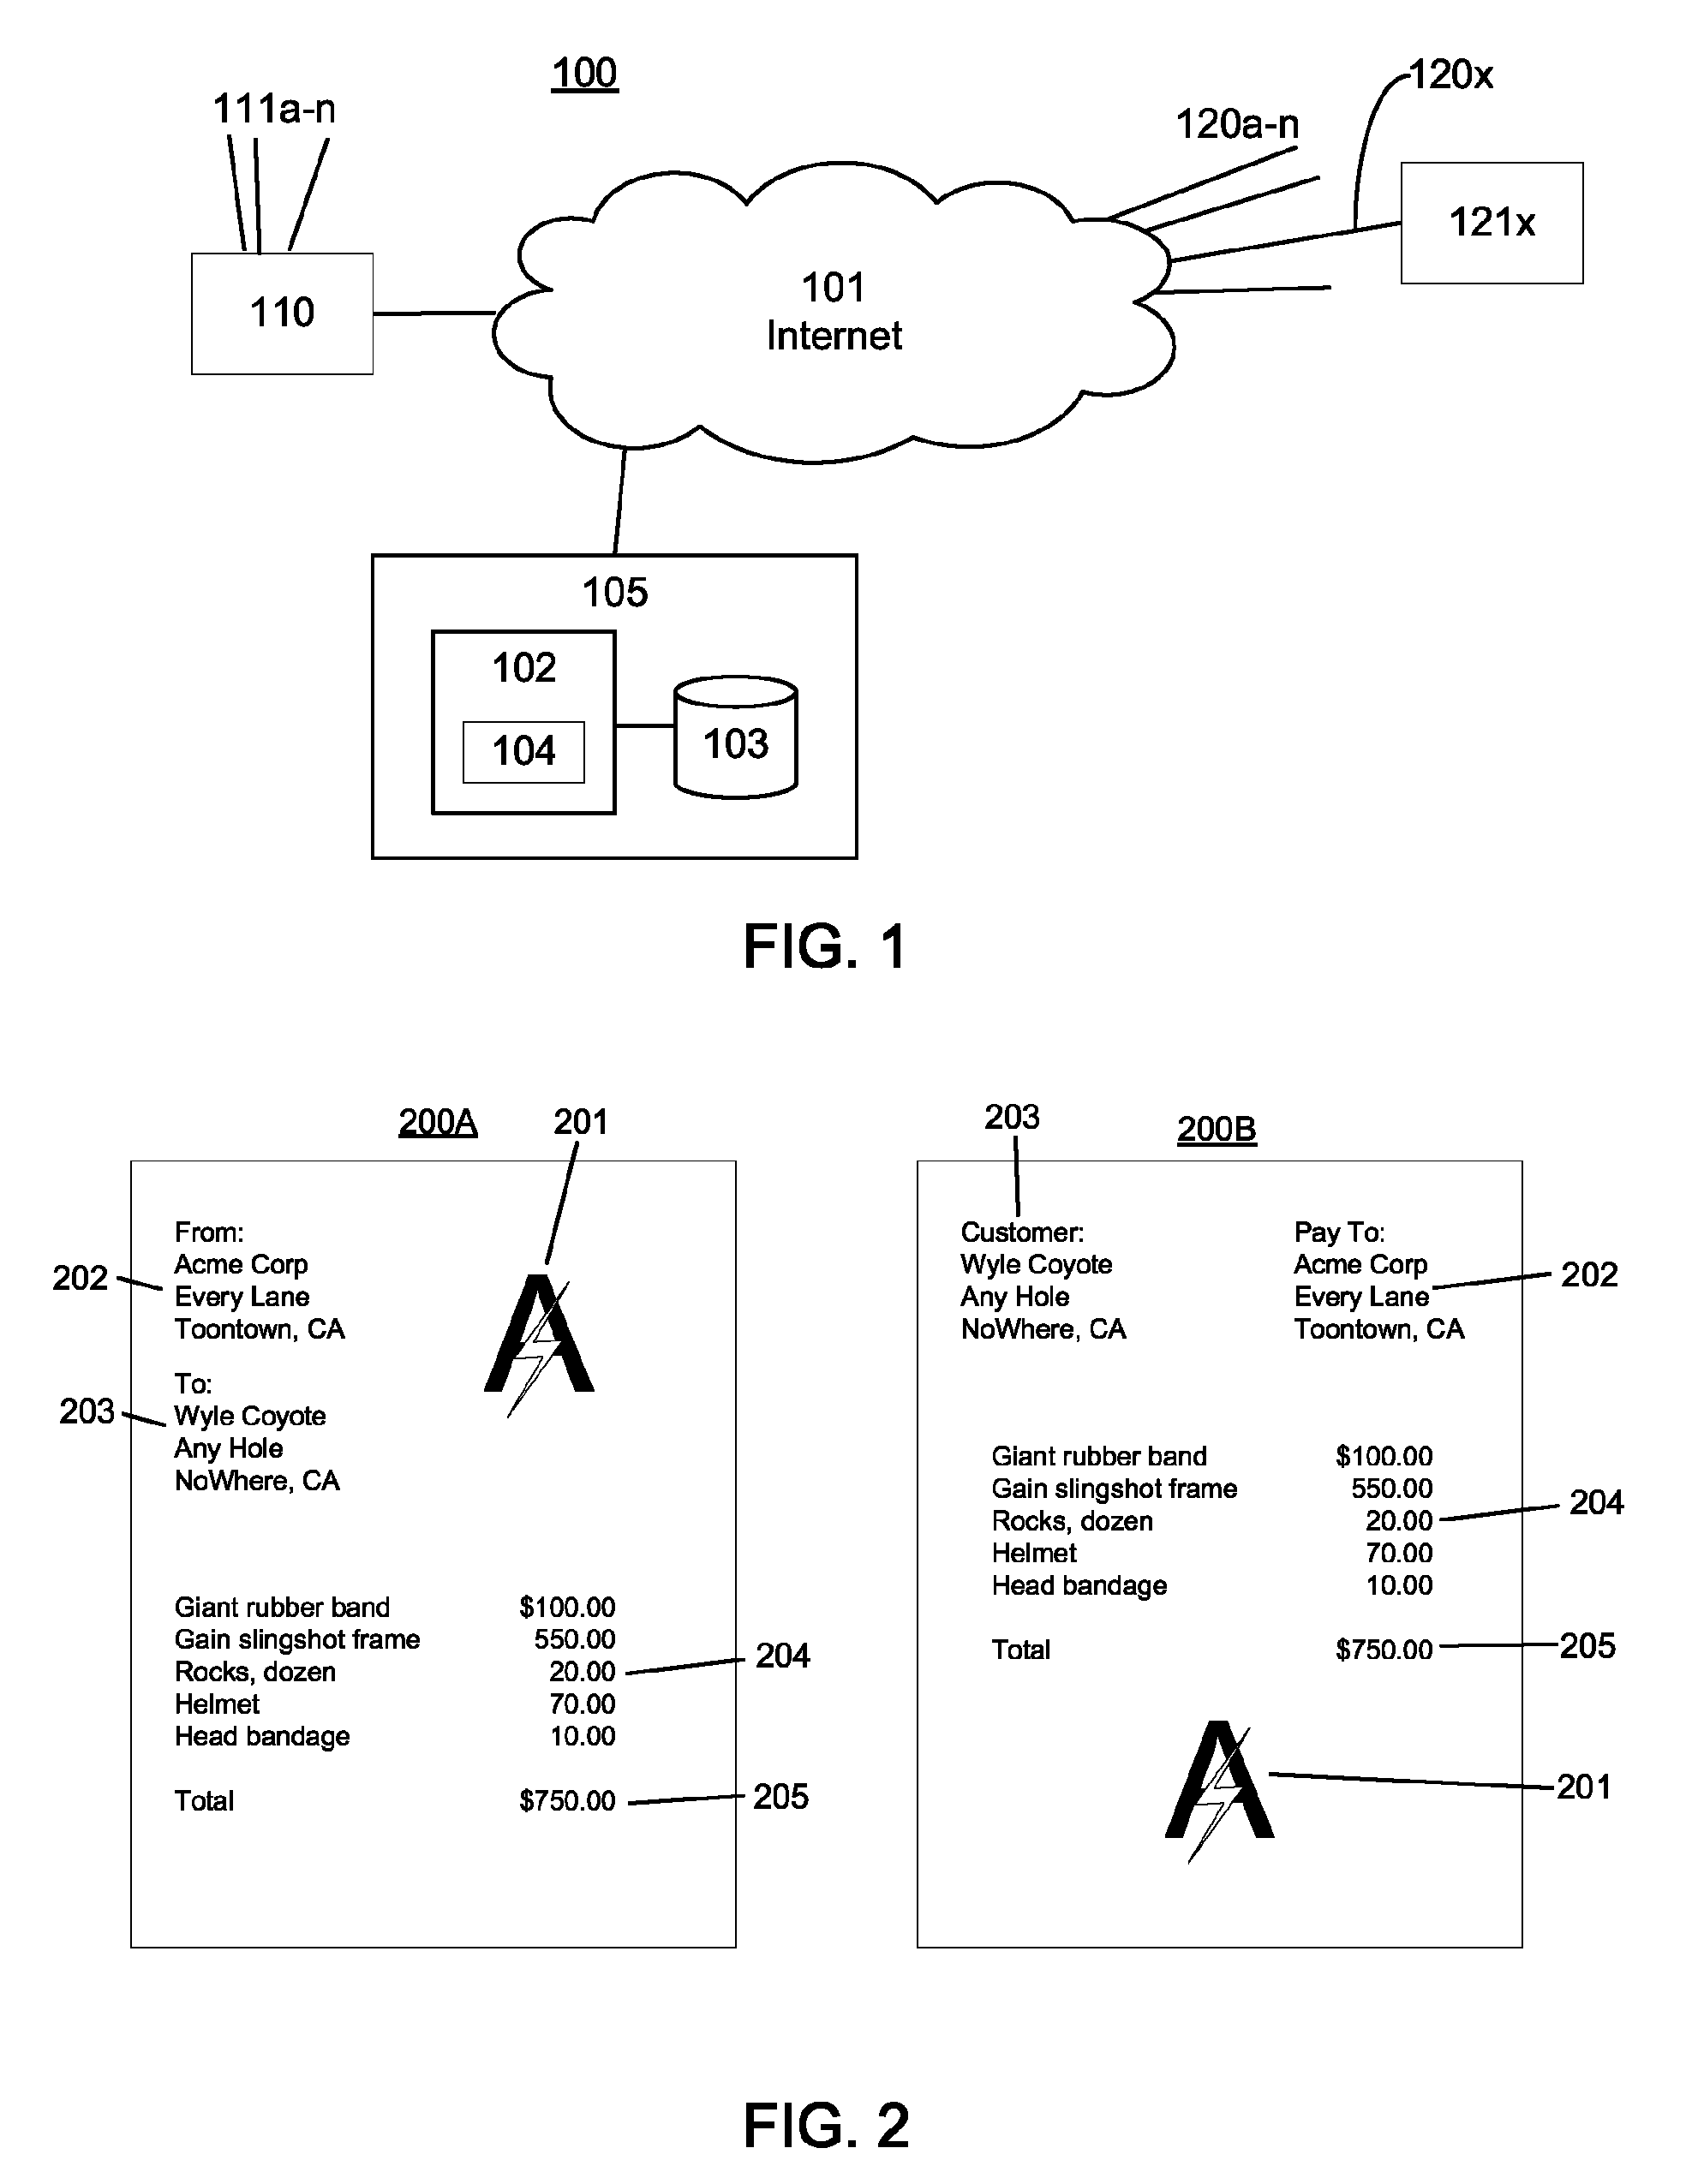 Enhanced system and method to verify that checks are deposited in the correct account